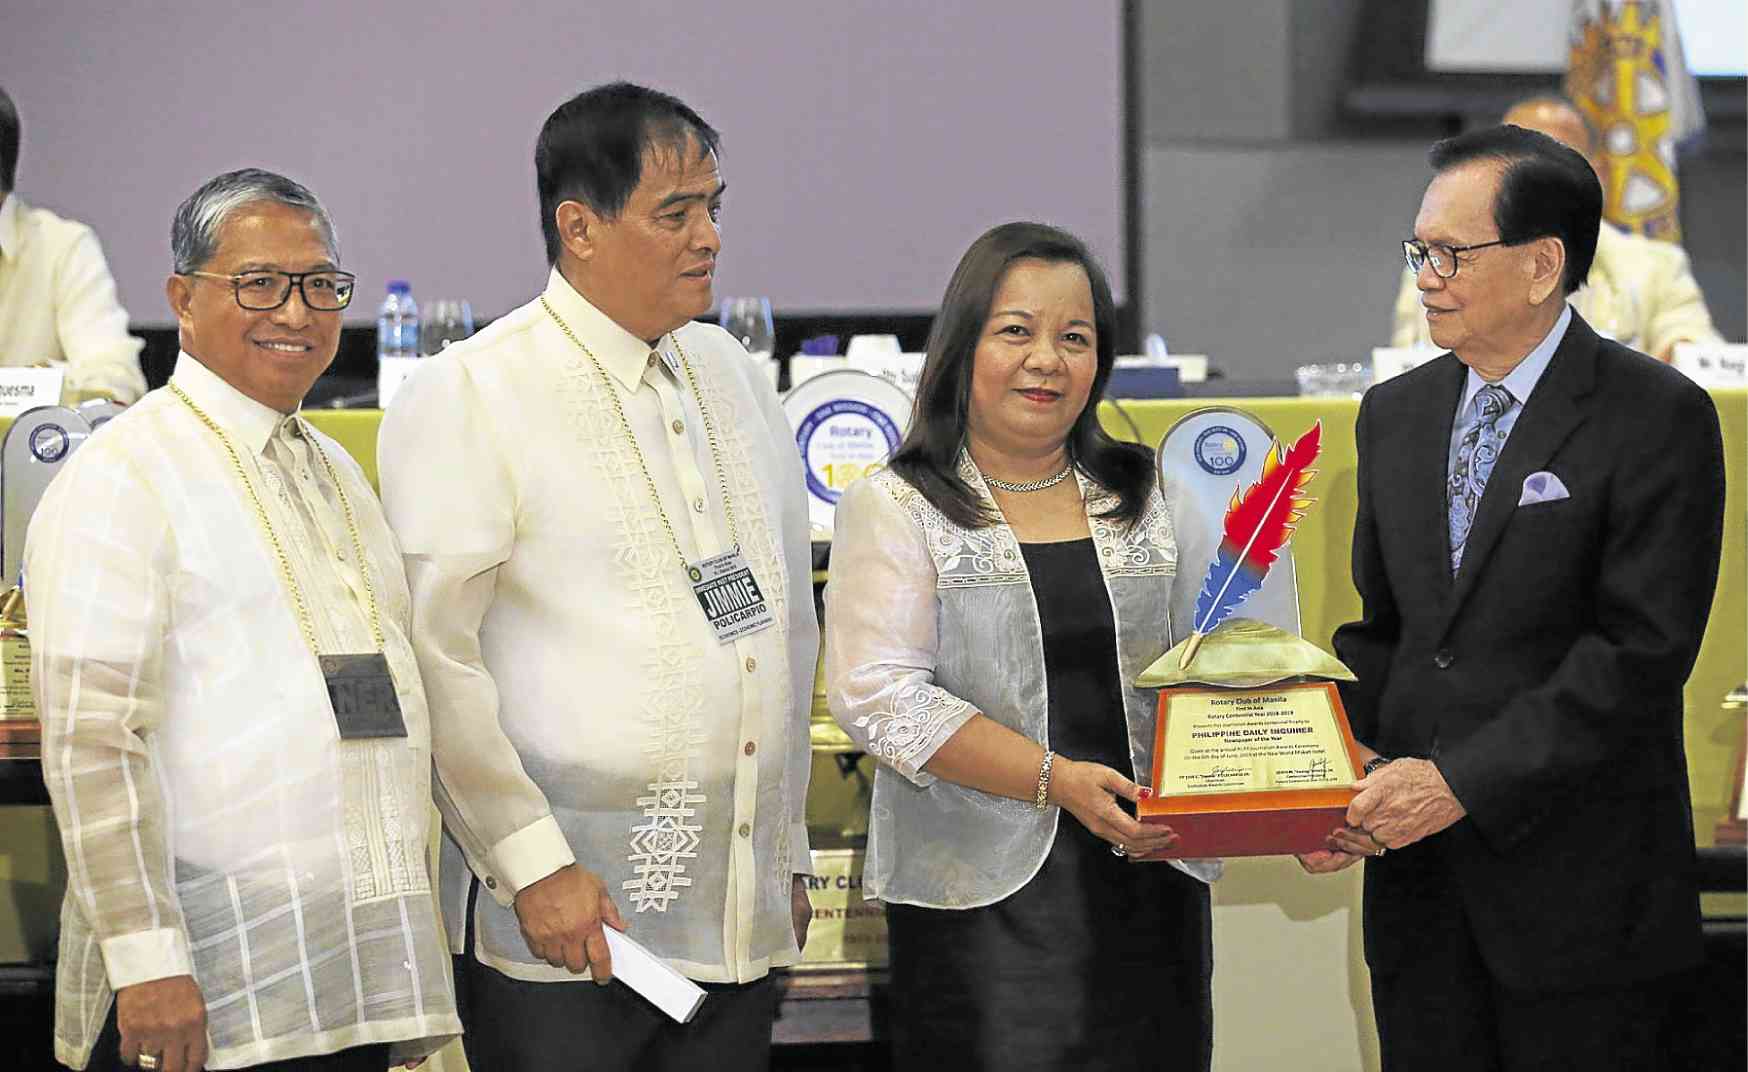 Rotarians’ choice: Inquirer Newspaper of the Year